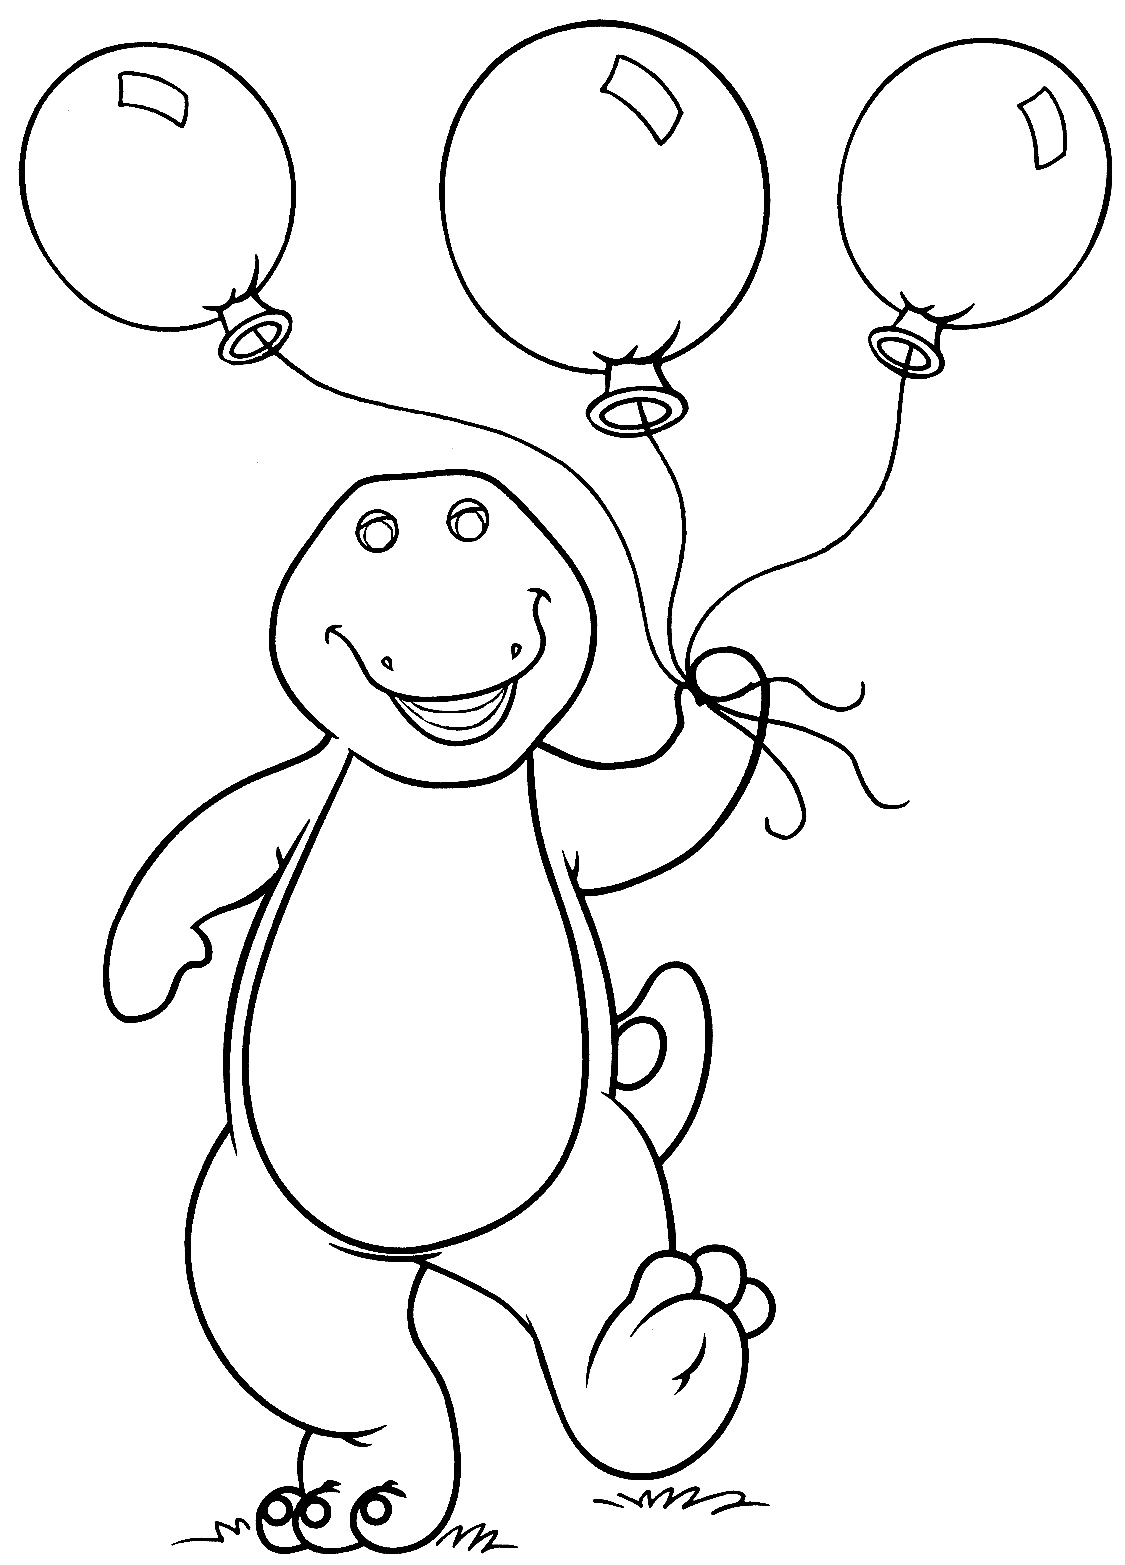 69 Free Printable Barney and Friends Coloring Pages